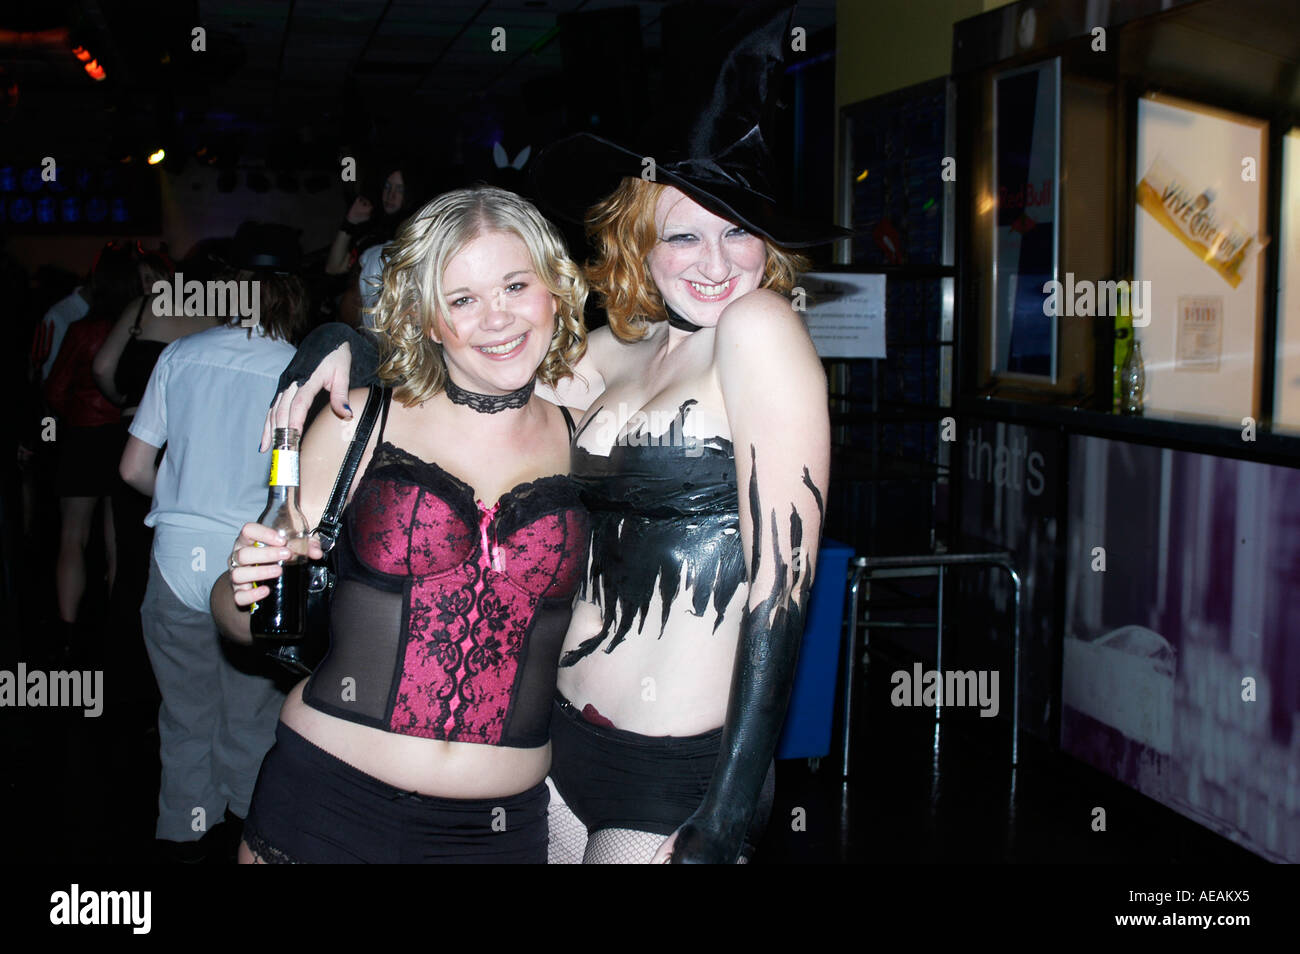 two girls having a good night out at Rocky Horror show disco night at Aberystwyth University students union, Wales UK Stock Photo